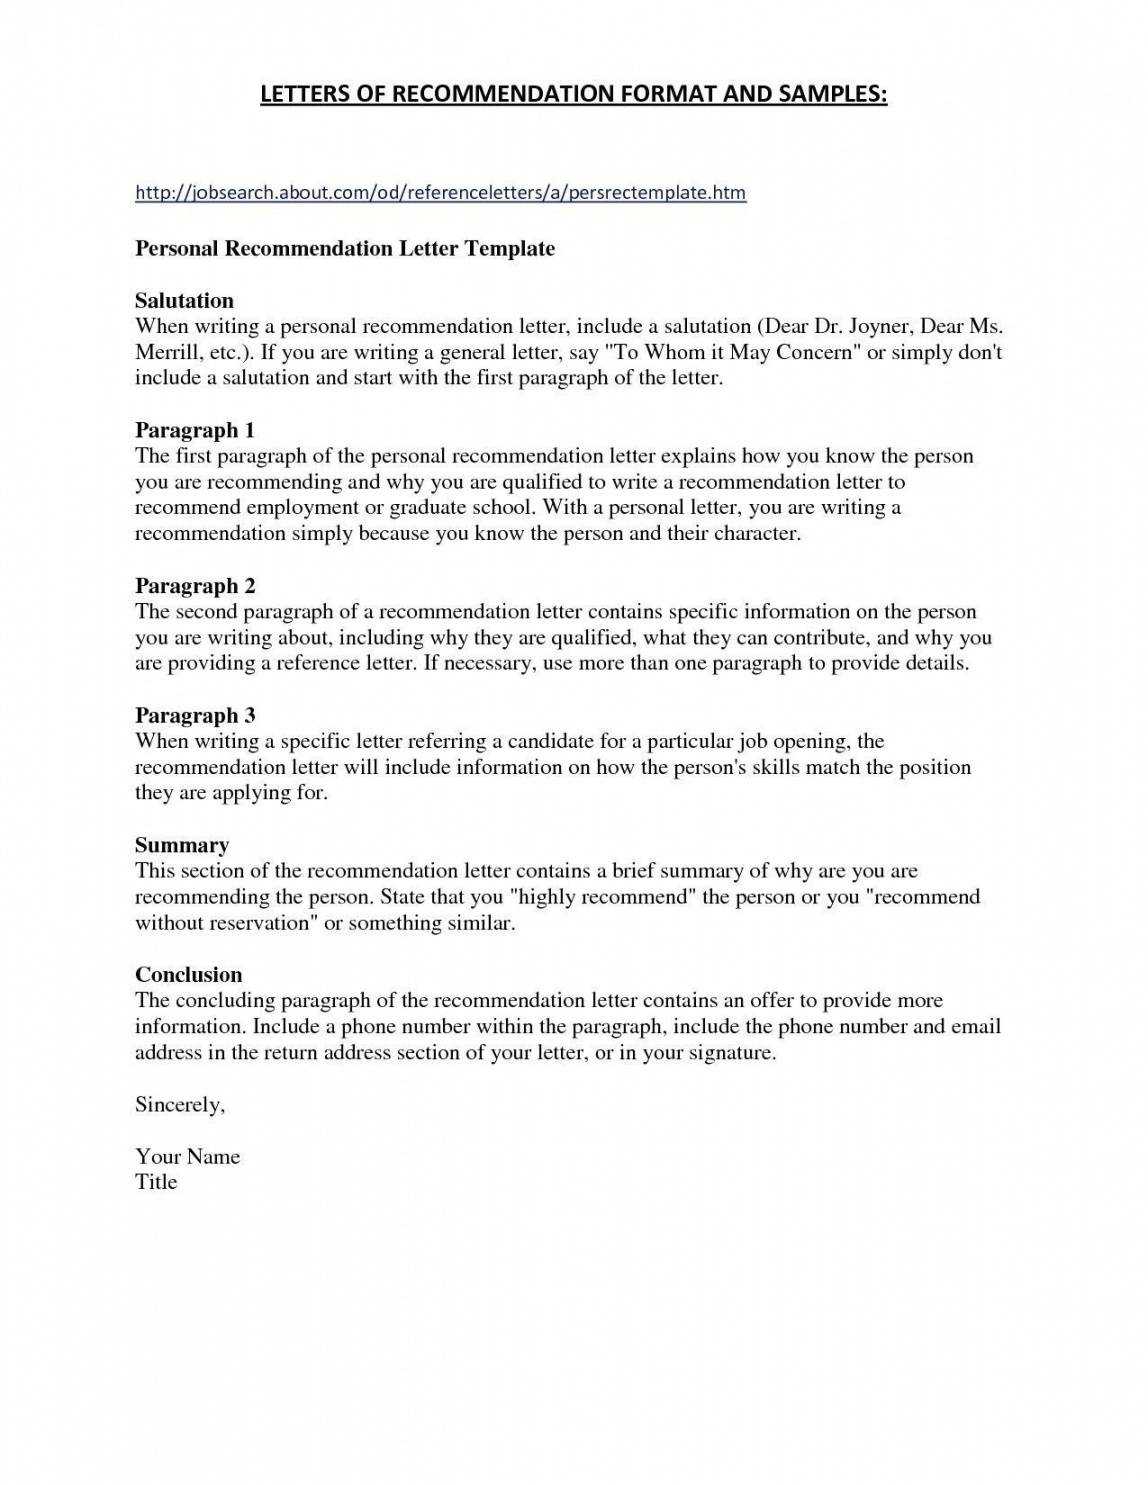 Sample Template For Letter Of Recommendation Collection Throughout Recommendation Report Template